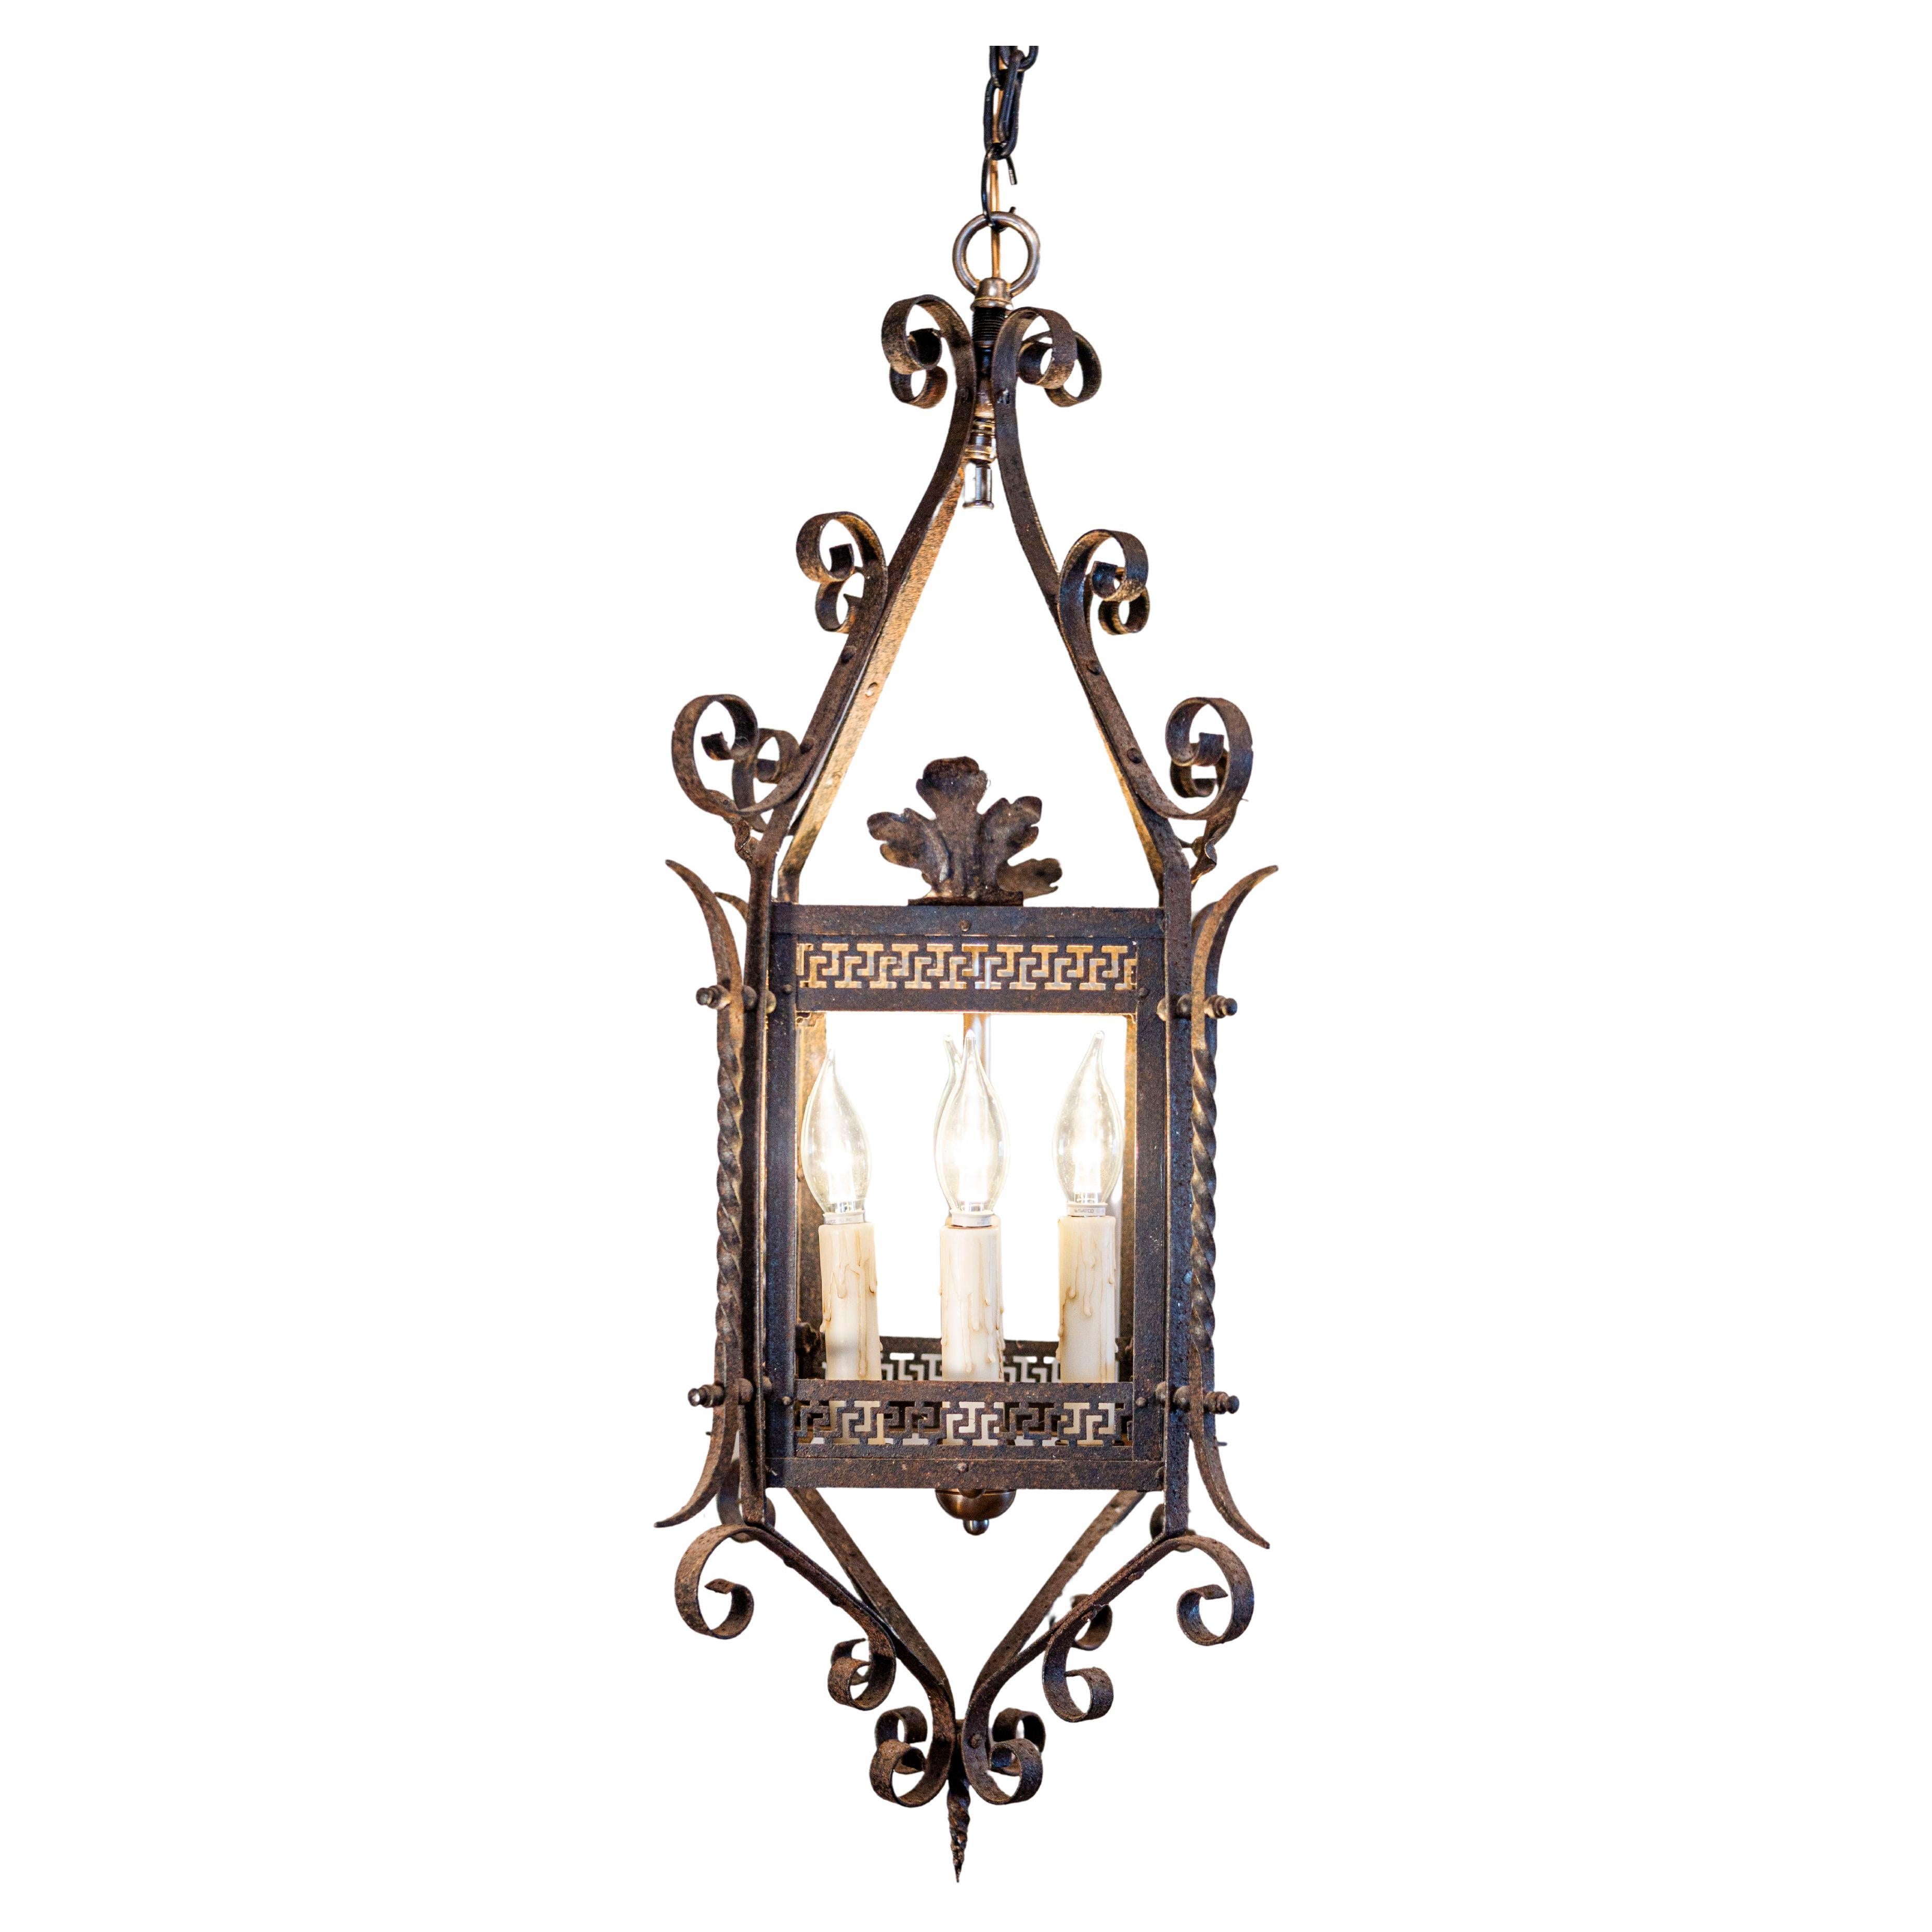 French Wrought-Iron Four Light Lantern with Scrolling and Openwork Motifs